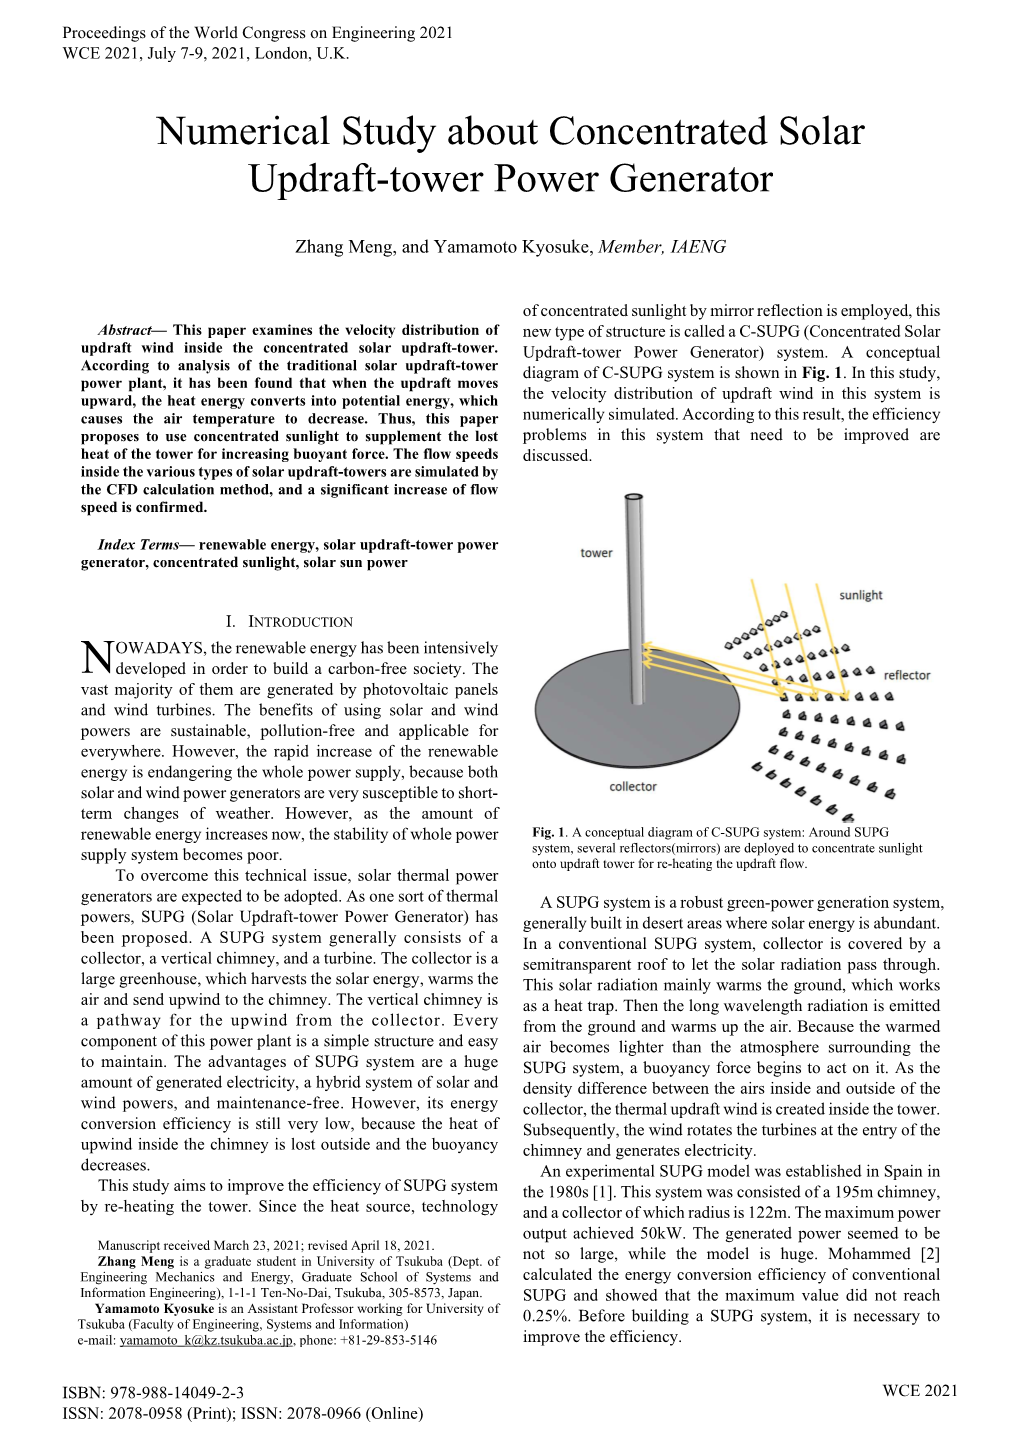 Numerical Study About Concentrated Solar Updraft-Tower Power Generator